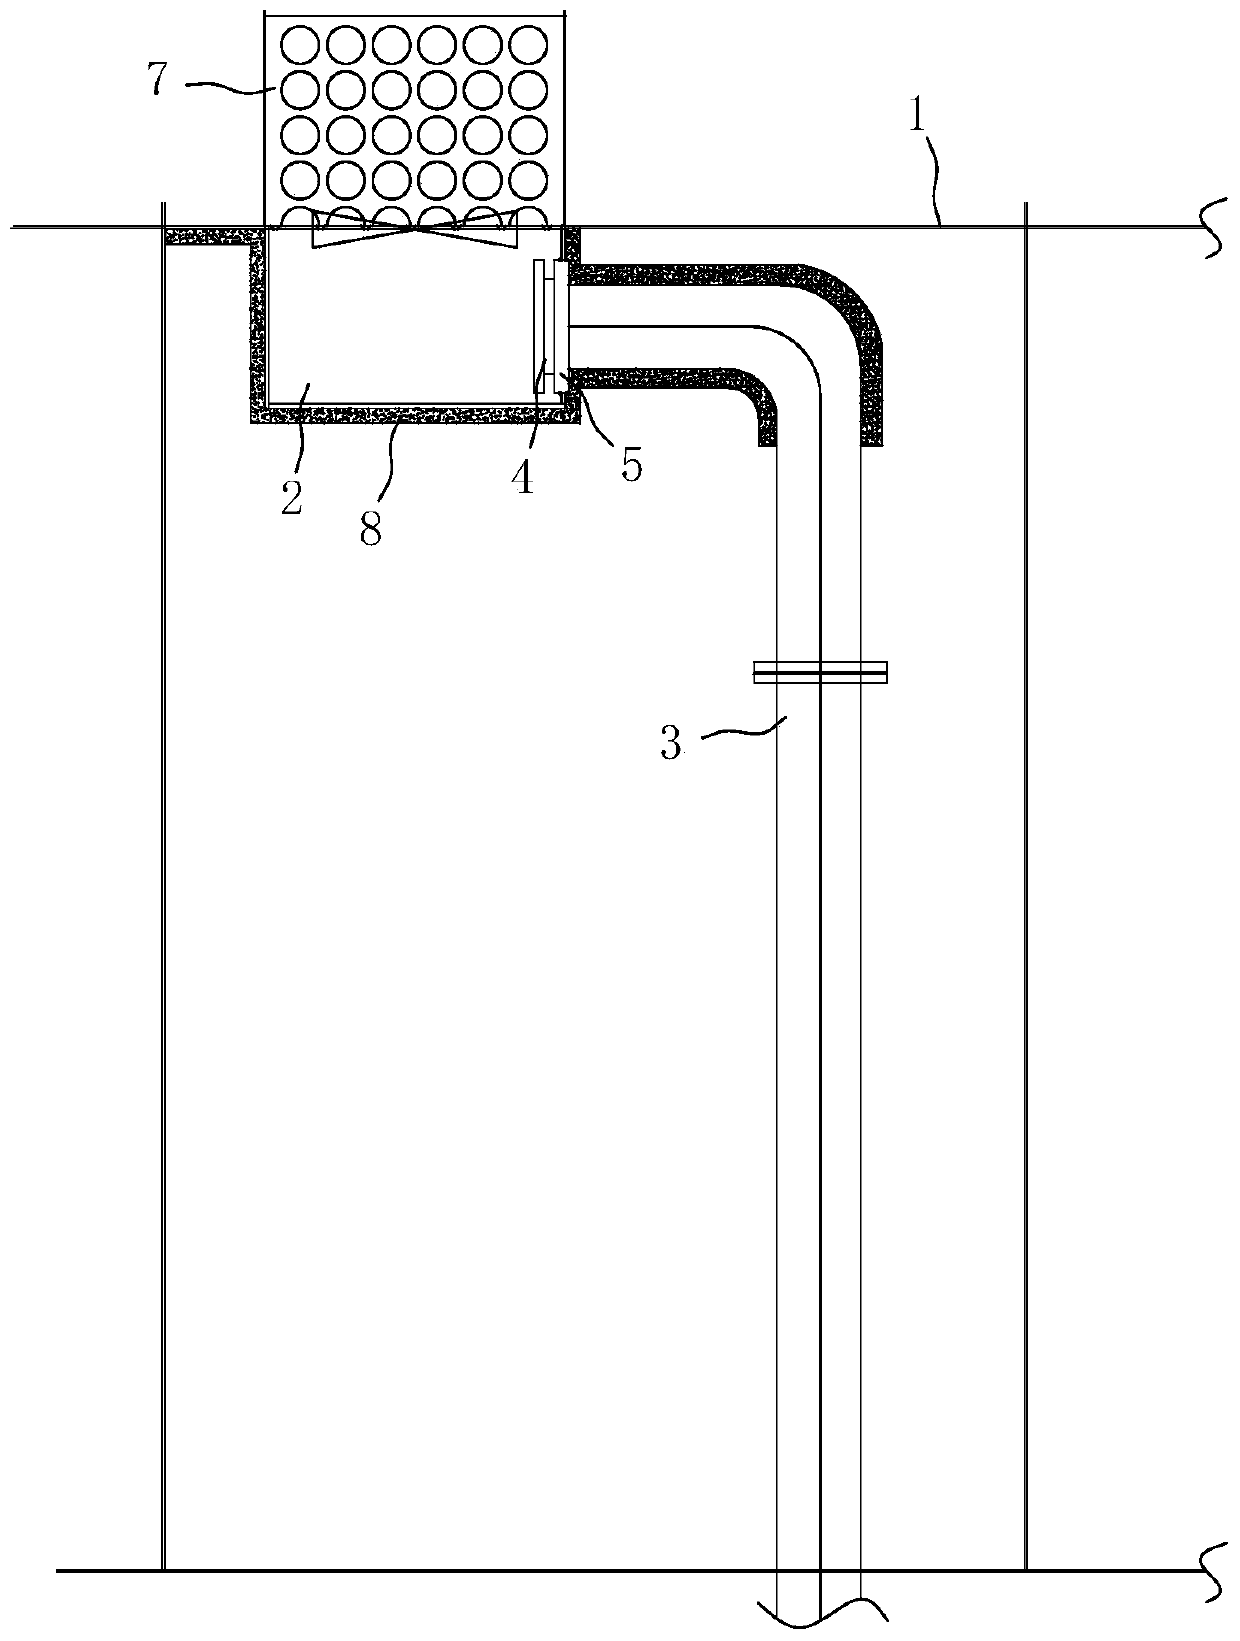 Backflow-prevention drainage structure for ship